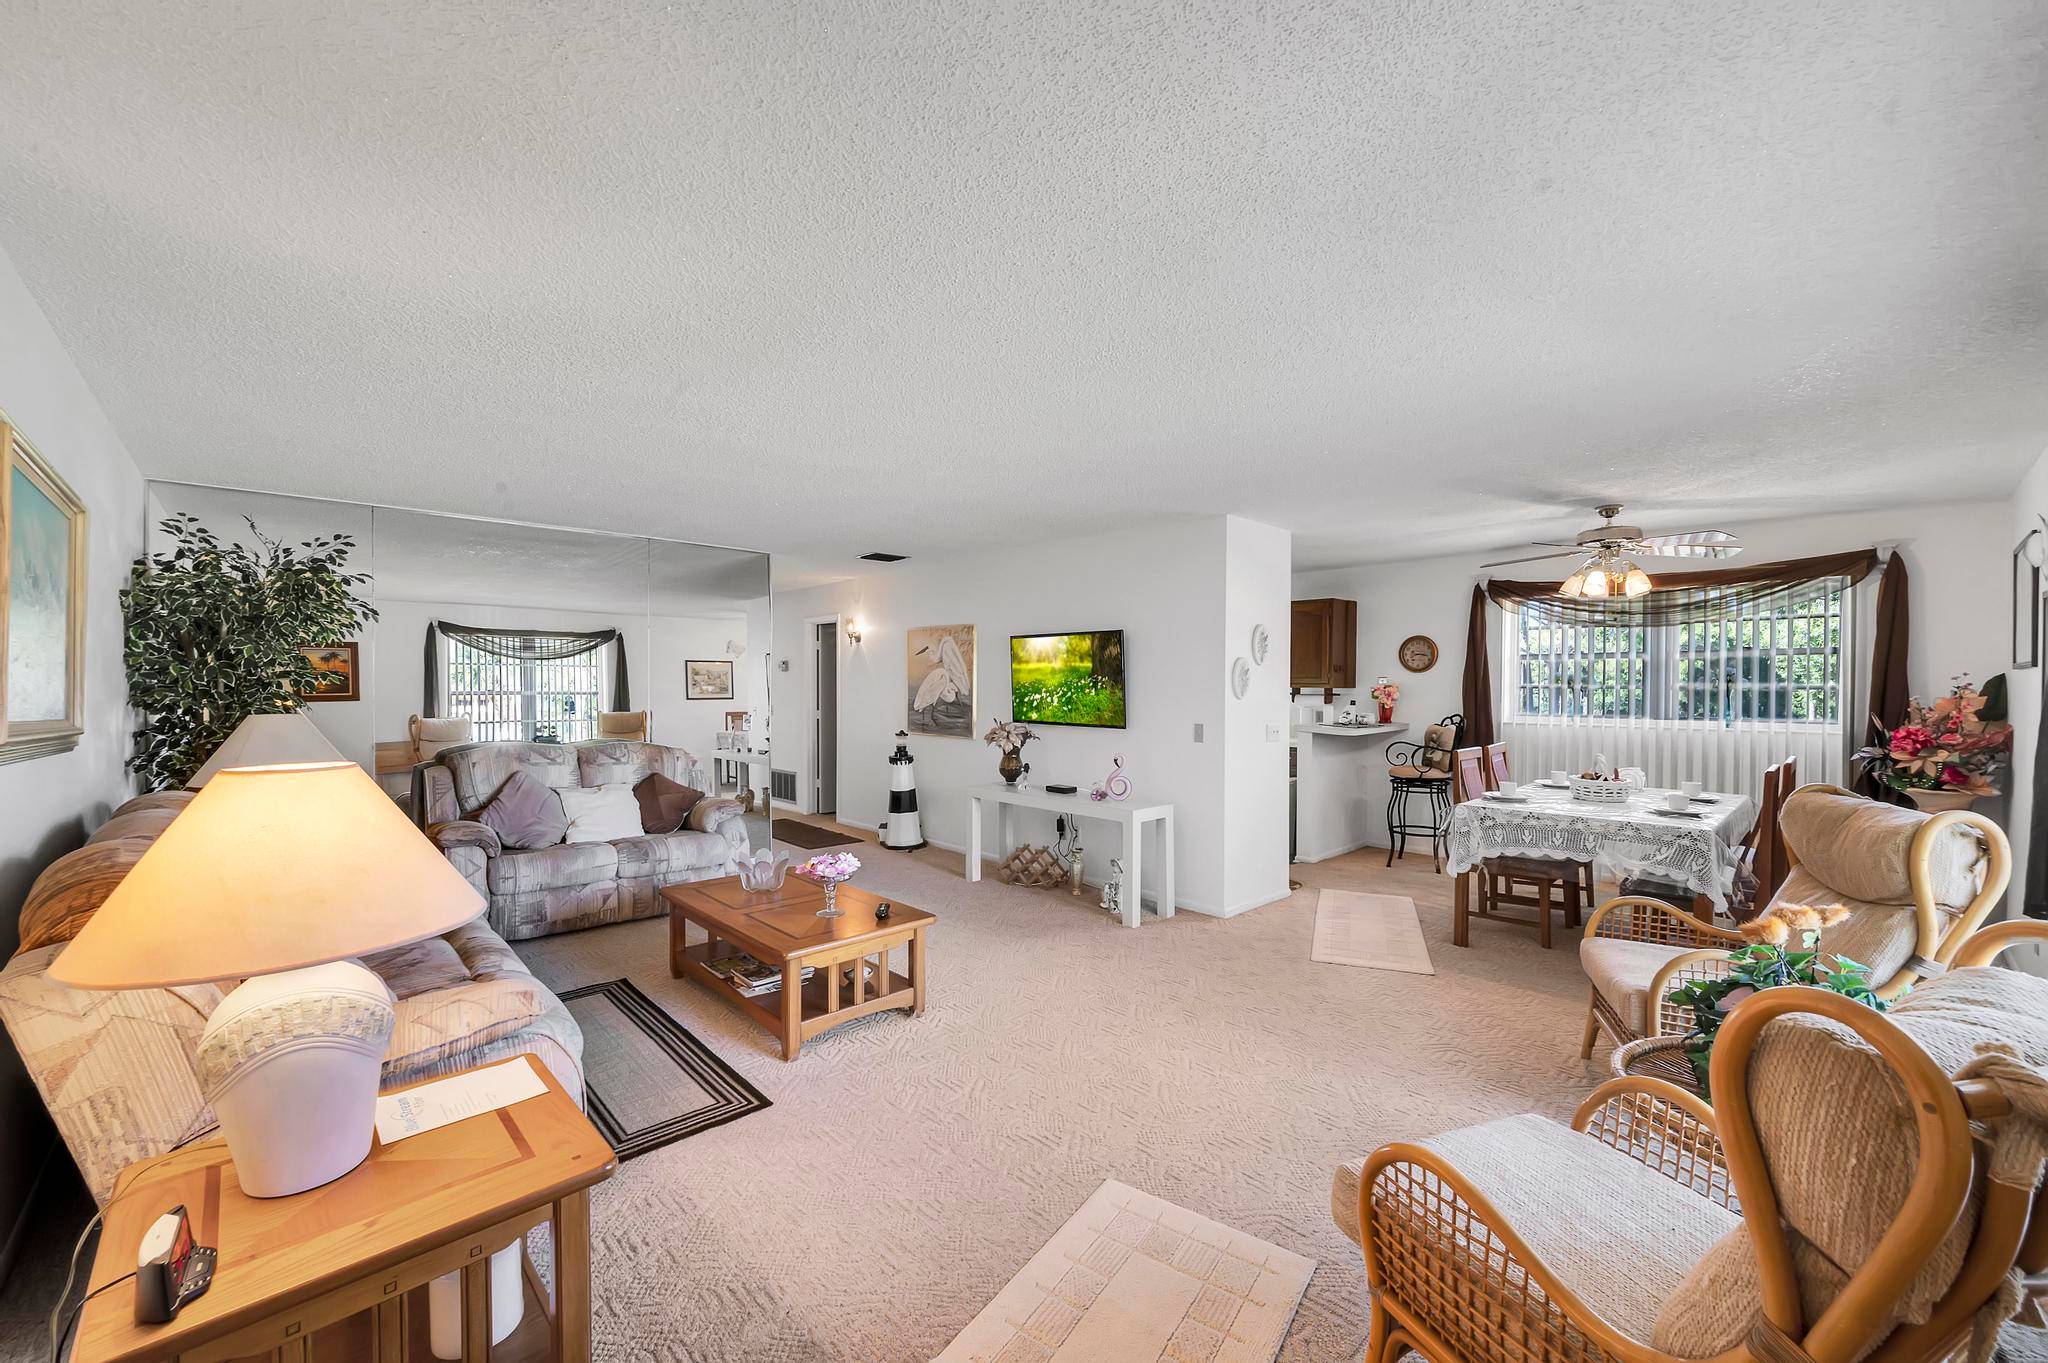 This meticulously maintained condo offers 2 bedrooms, 2 bathrooms, and carpet throughout for cozy comfort.